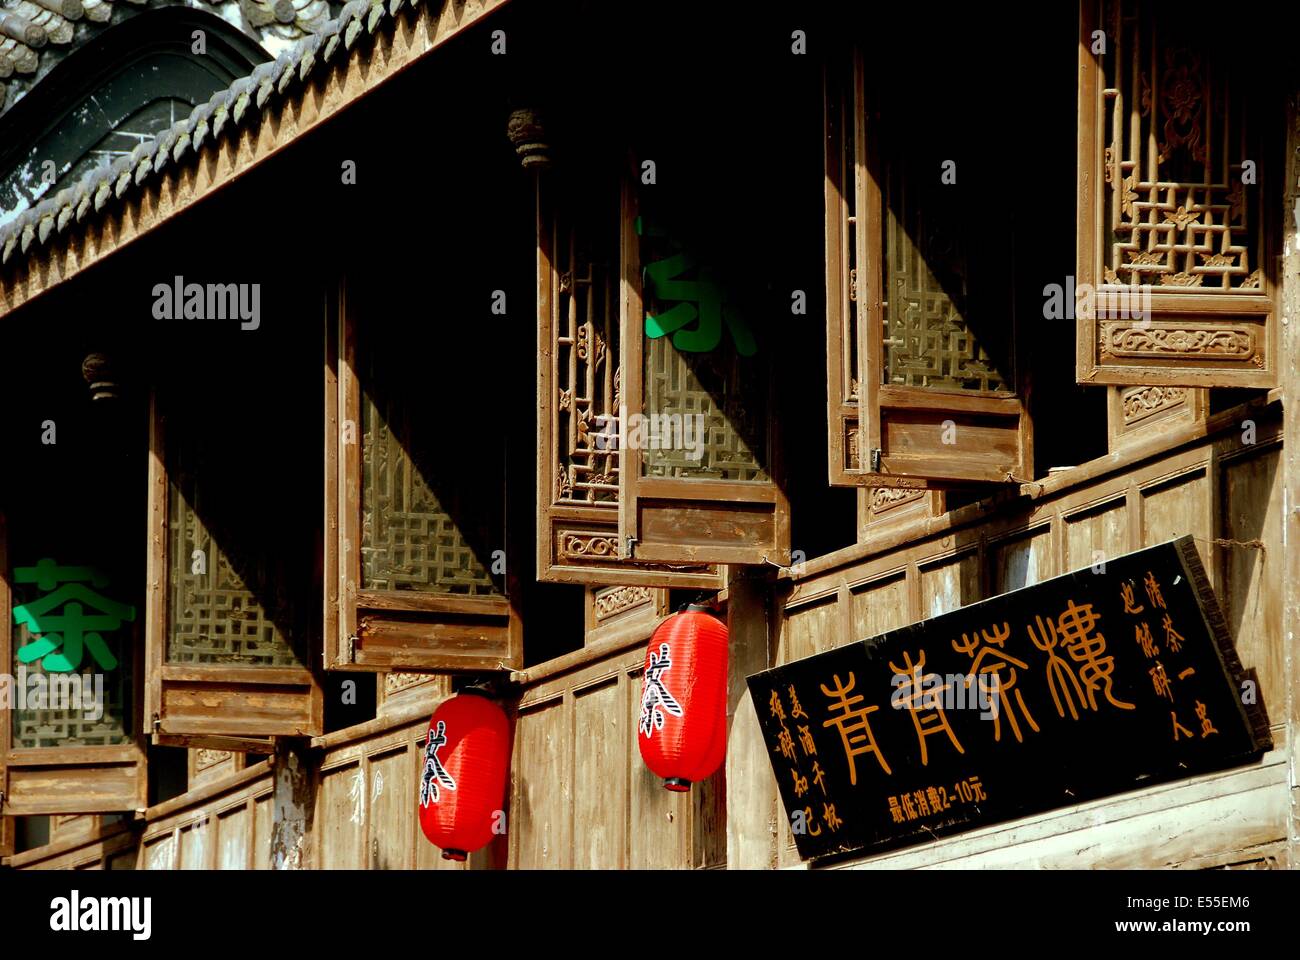 LUO DAI, CHINA:  Handsome wooden windows with ornate tracery on an ancient Hakka house Stock Photo